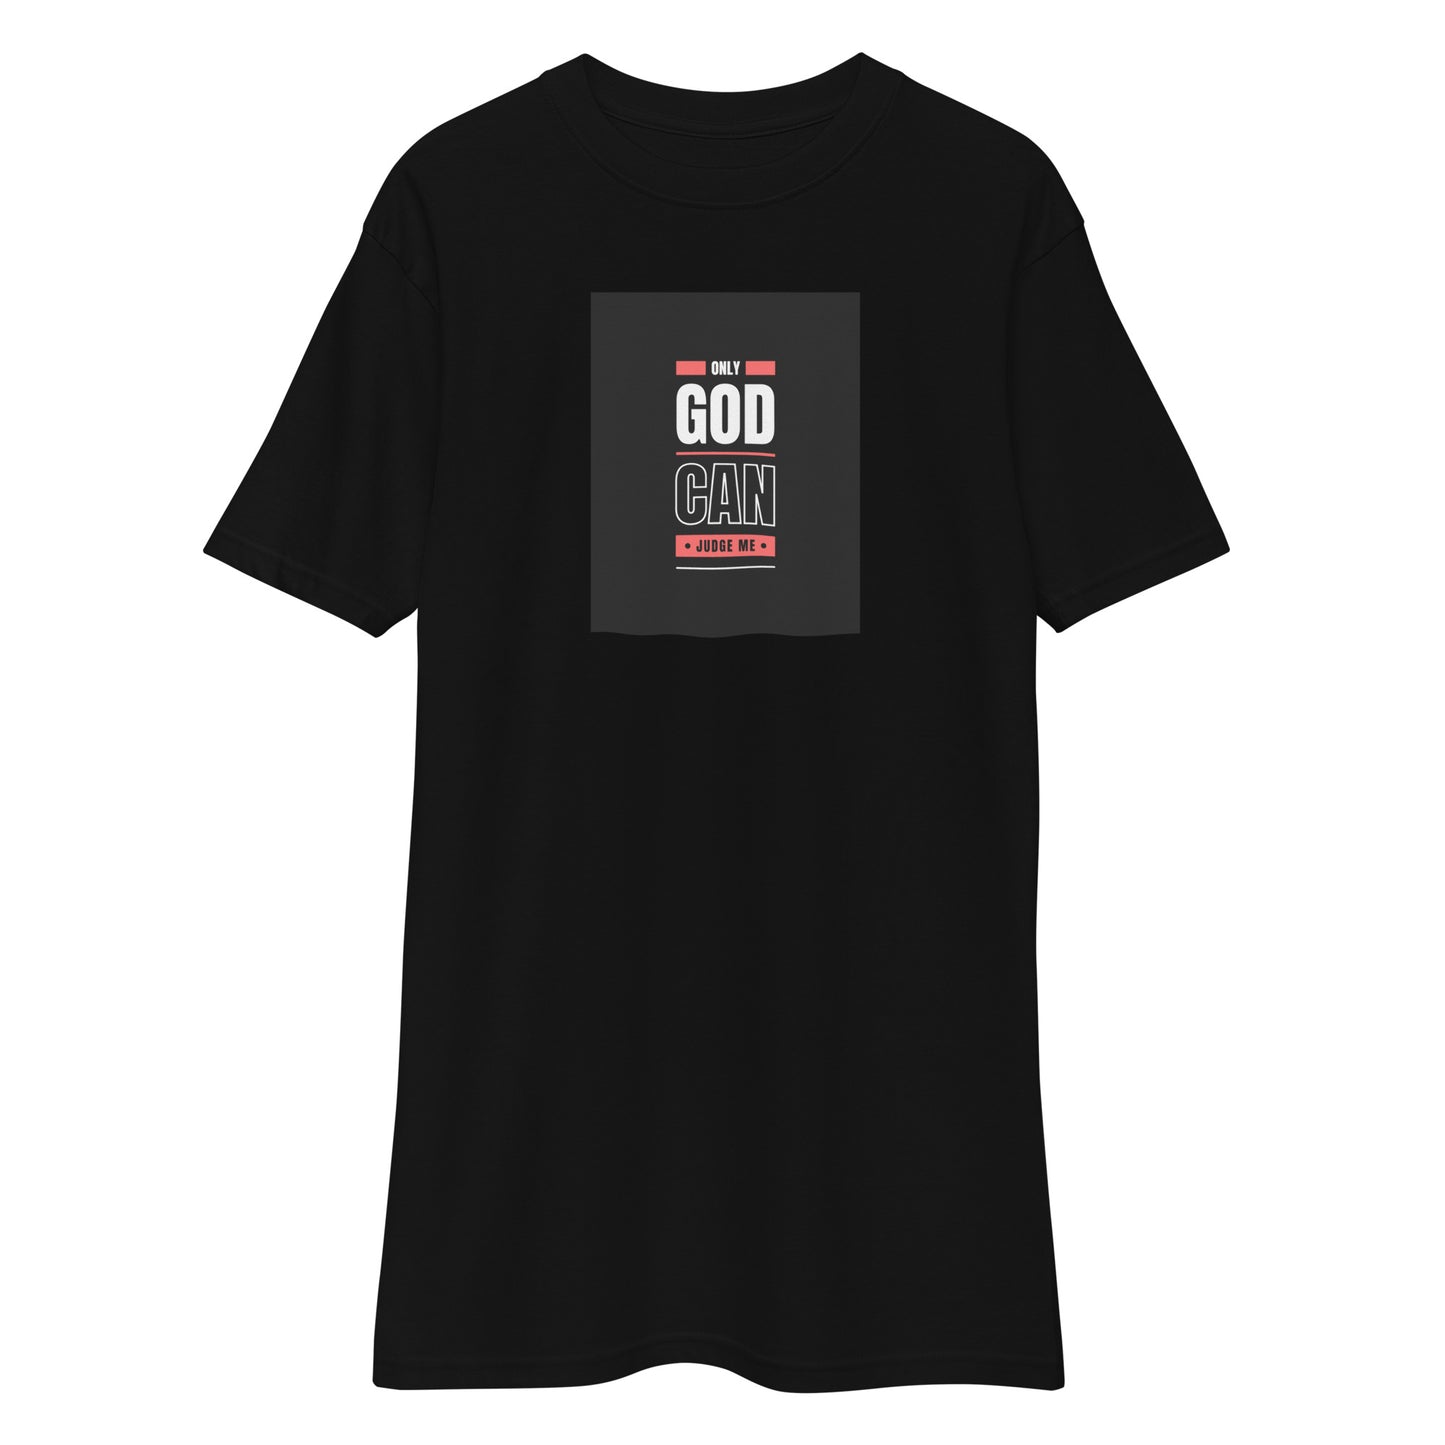 ONLY GOD CAN JUDGE ME Men’s premium heavyweight tee